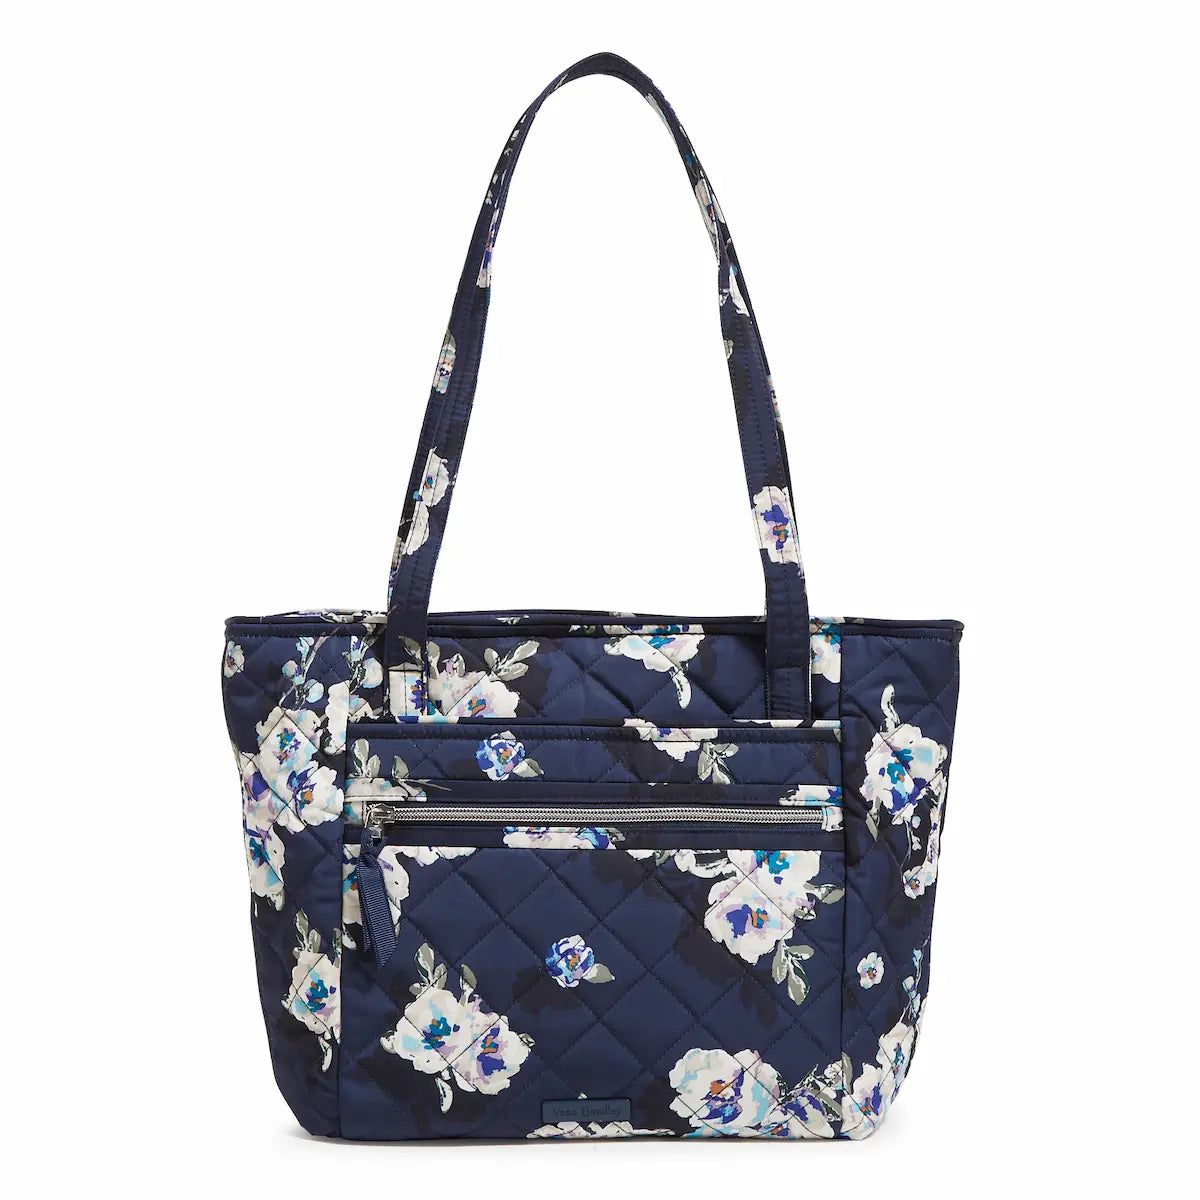 Vera Bradley Small Vera Tote in Blooms and Branches Navy.